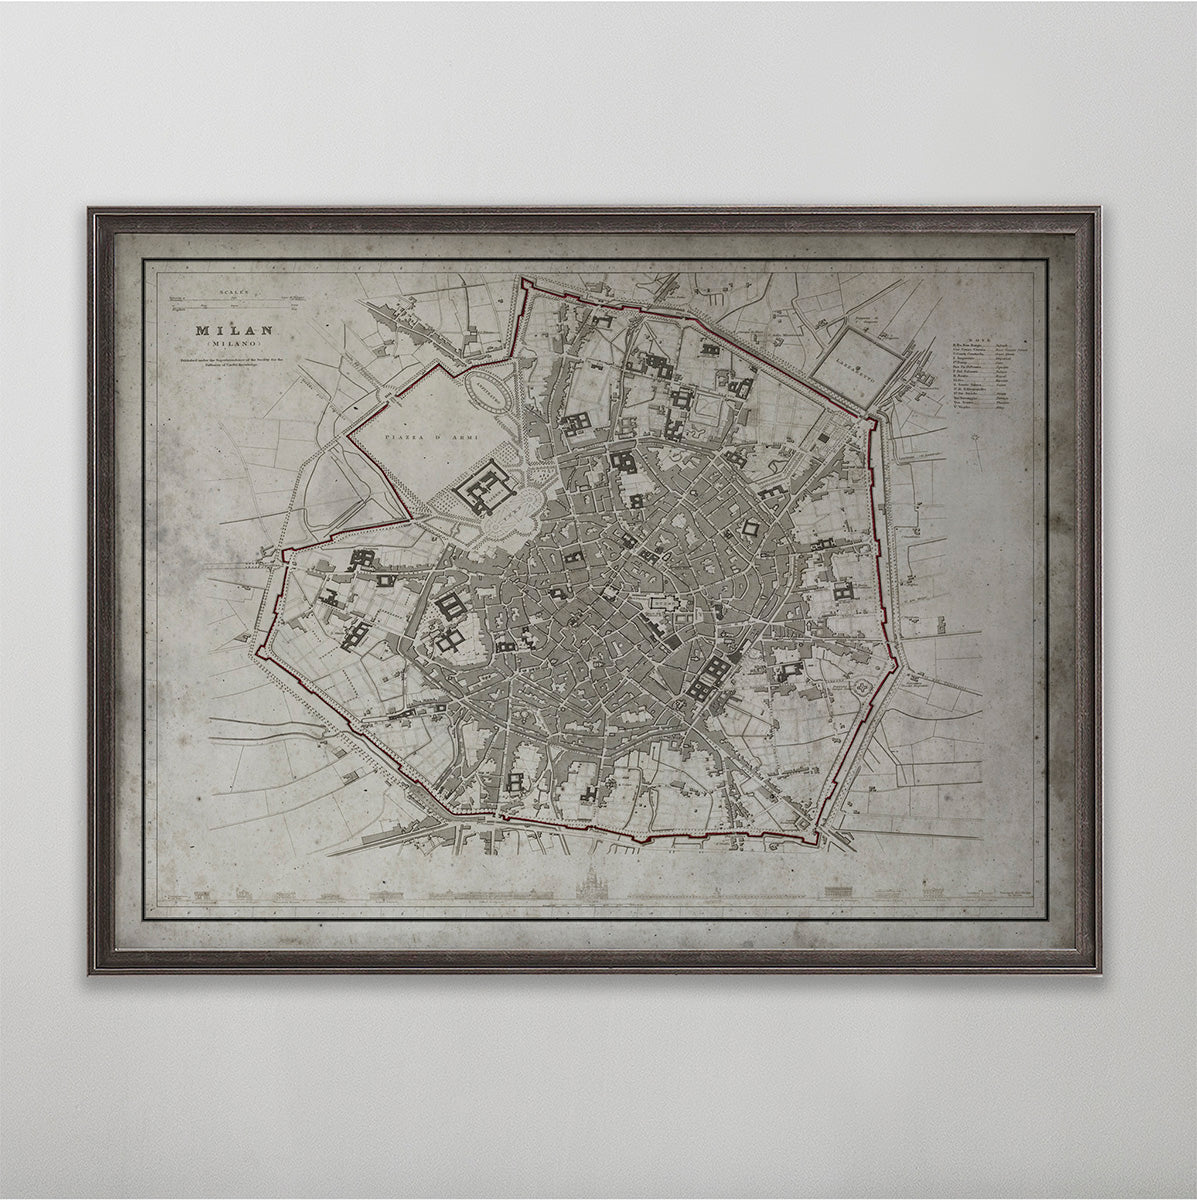 Old vintage historic map of Milan for wall art home decor. 